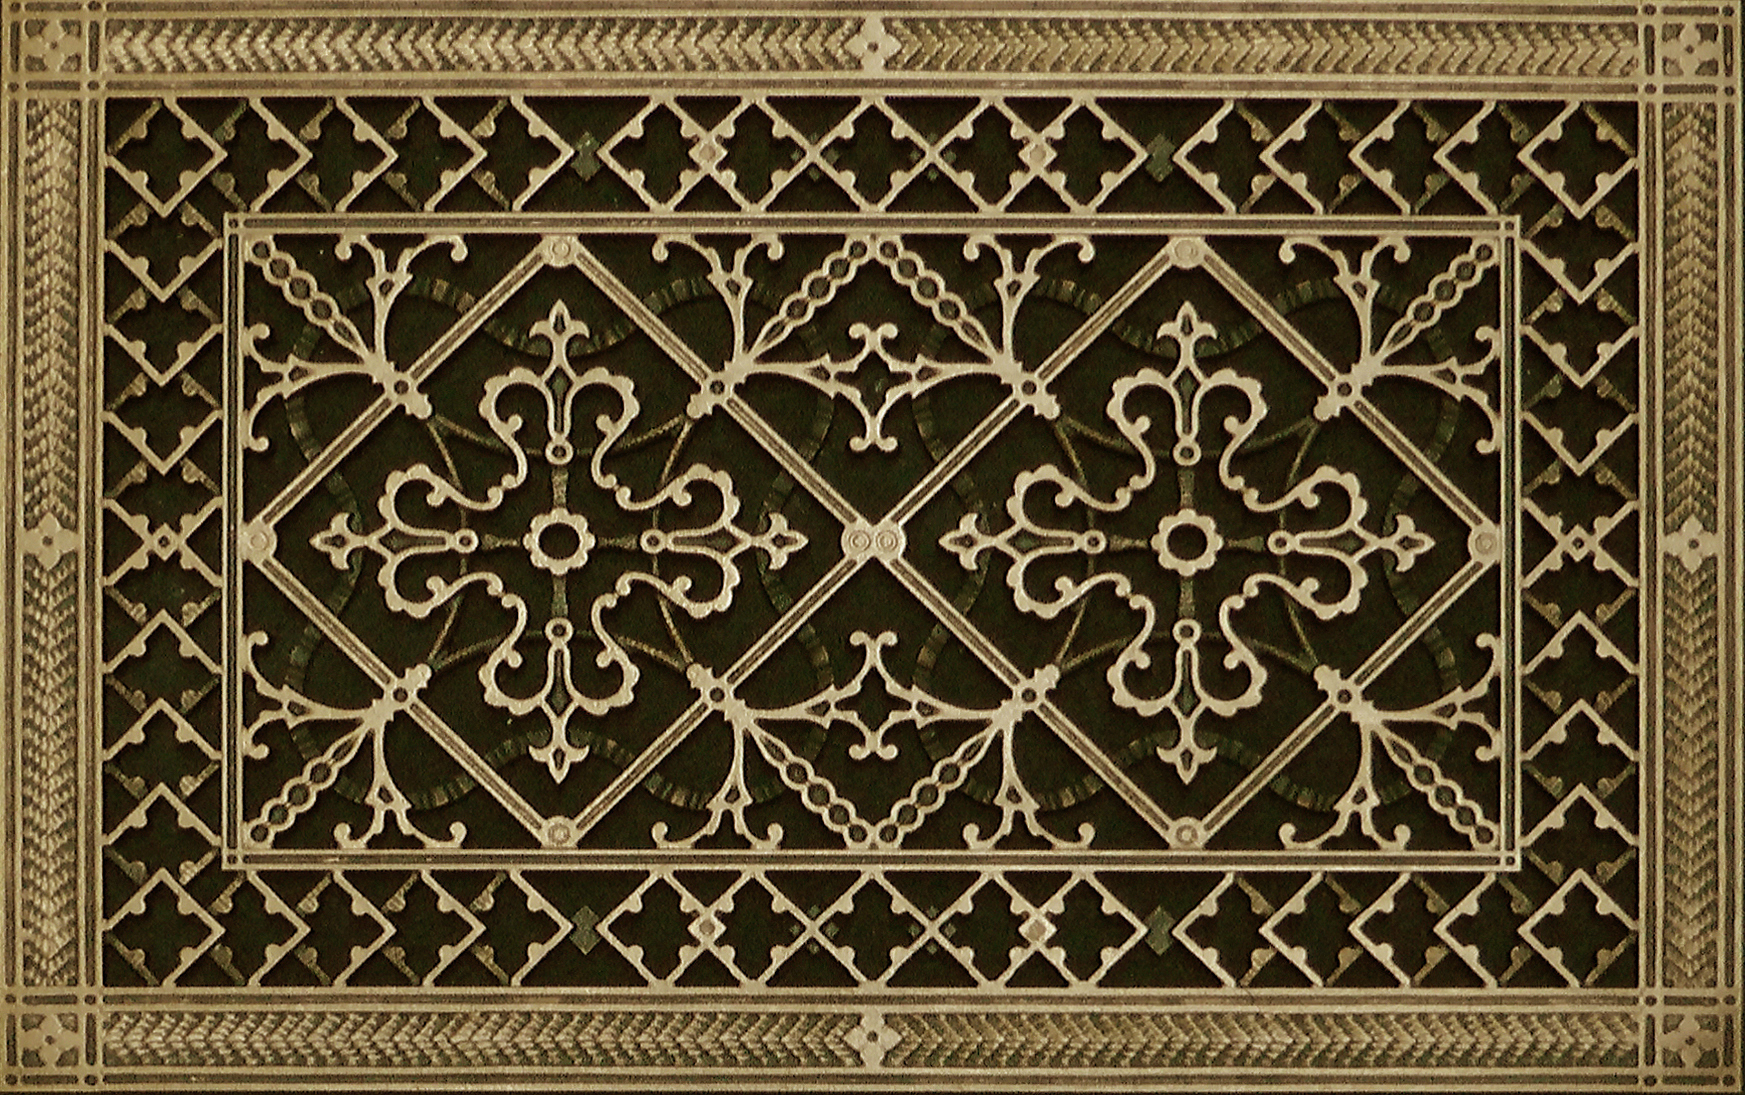 Decorative Grille Craftsman Style Arts and Crafts 12" x 20" in Antique brass finish